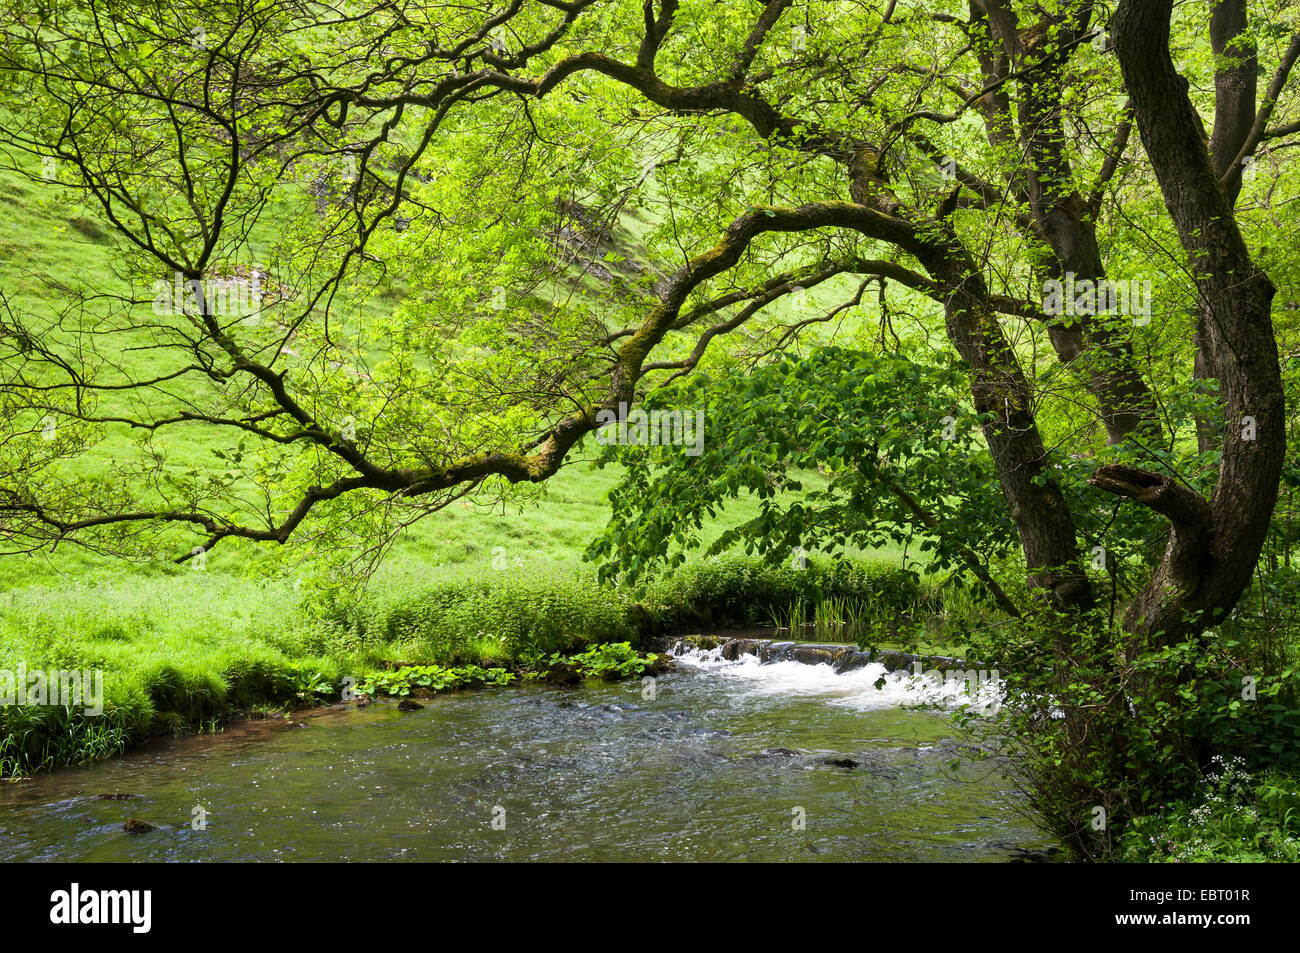 Branches of an Alder tree overhang the water of the River Dove in Wolfscote Dale, Derbyshire. Summer greens. Stock Photo